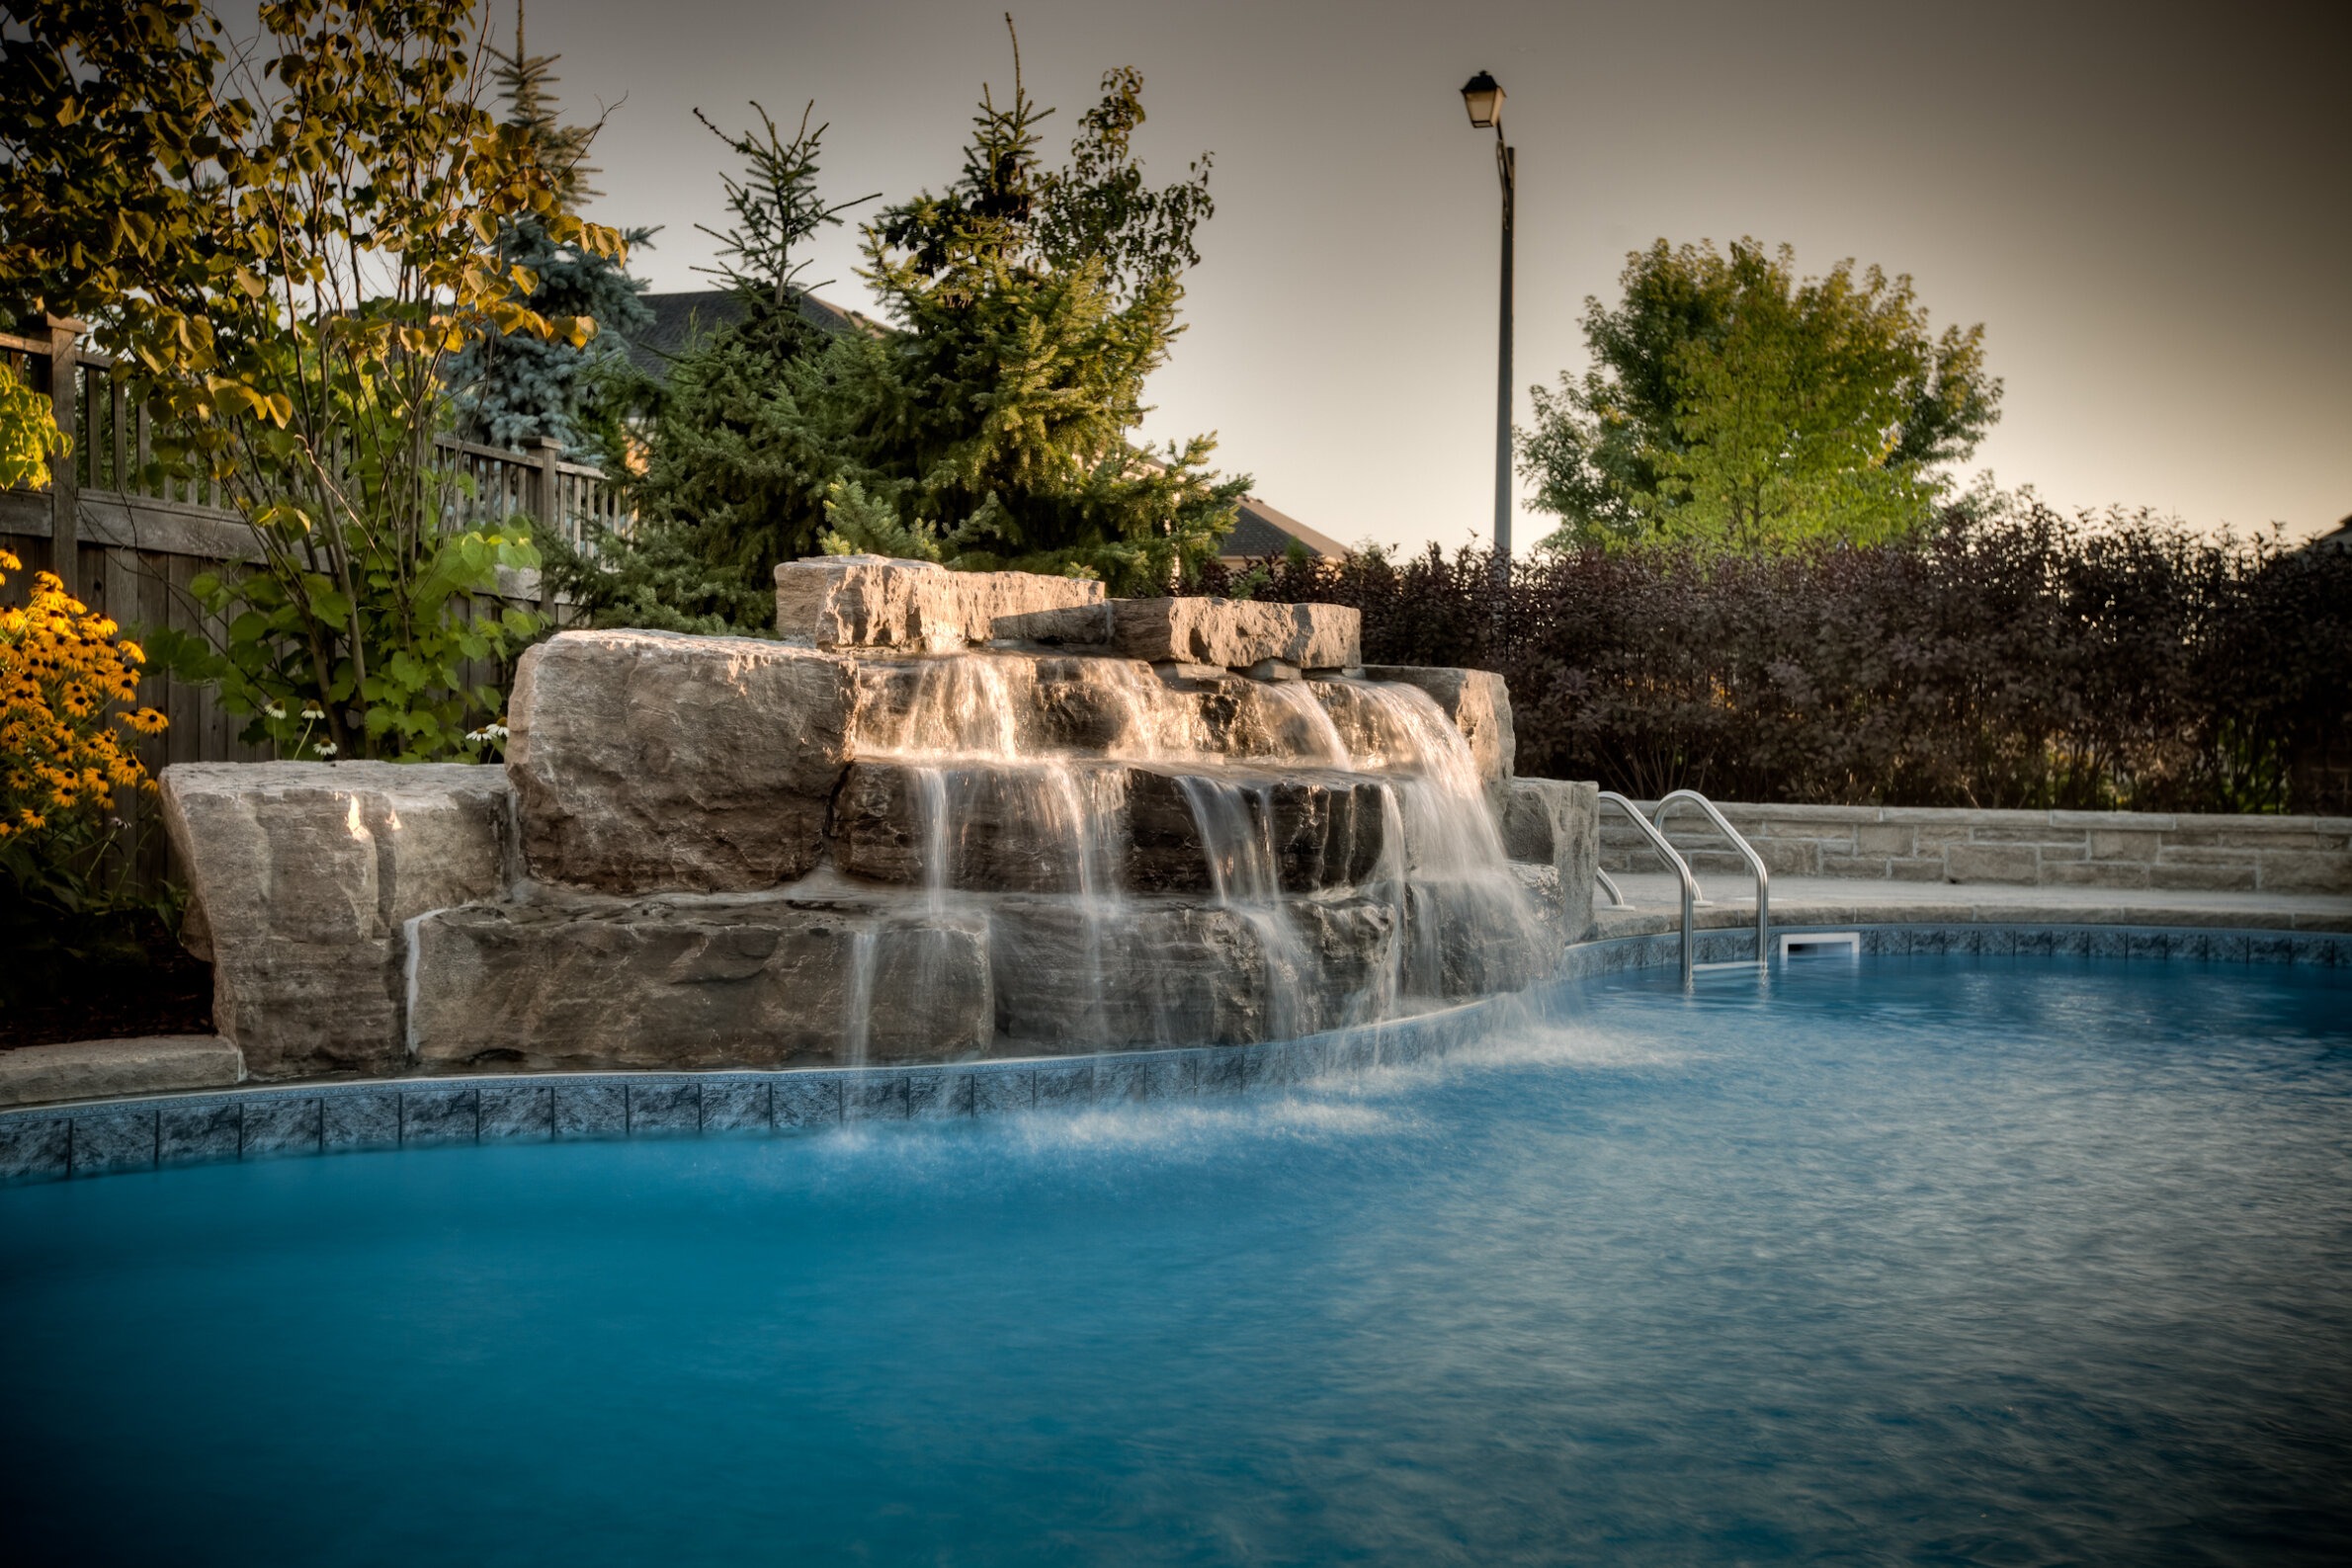 A serene backyard setting with a blue swimming pool featuring a cascading artificial rock waterfall, surrounded by greenery, flowers, and a lamppost.